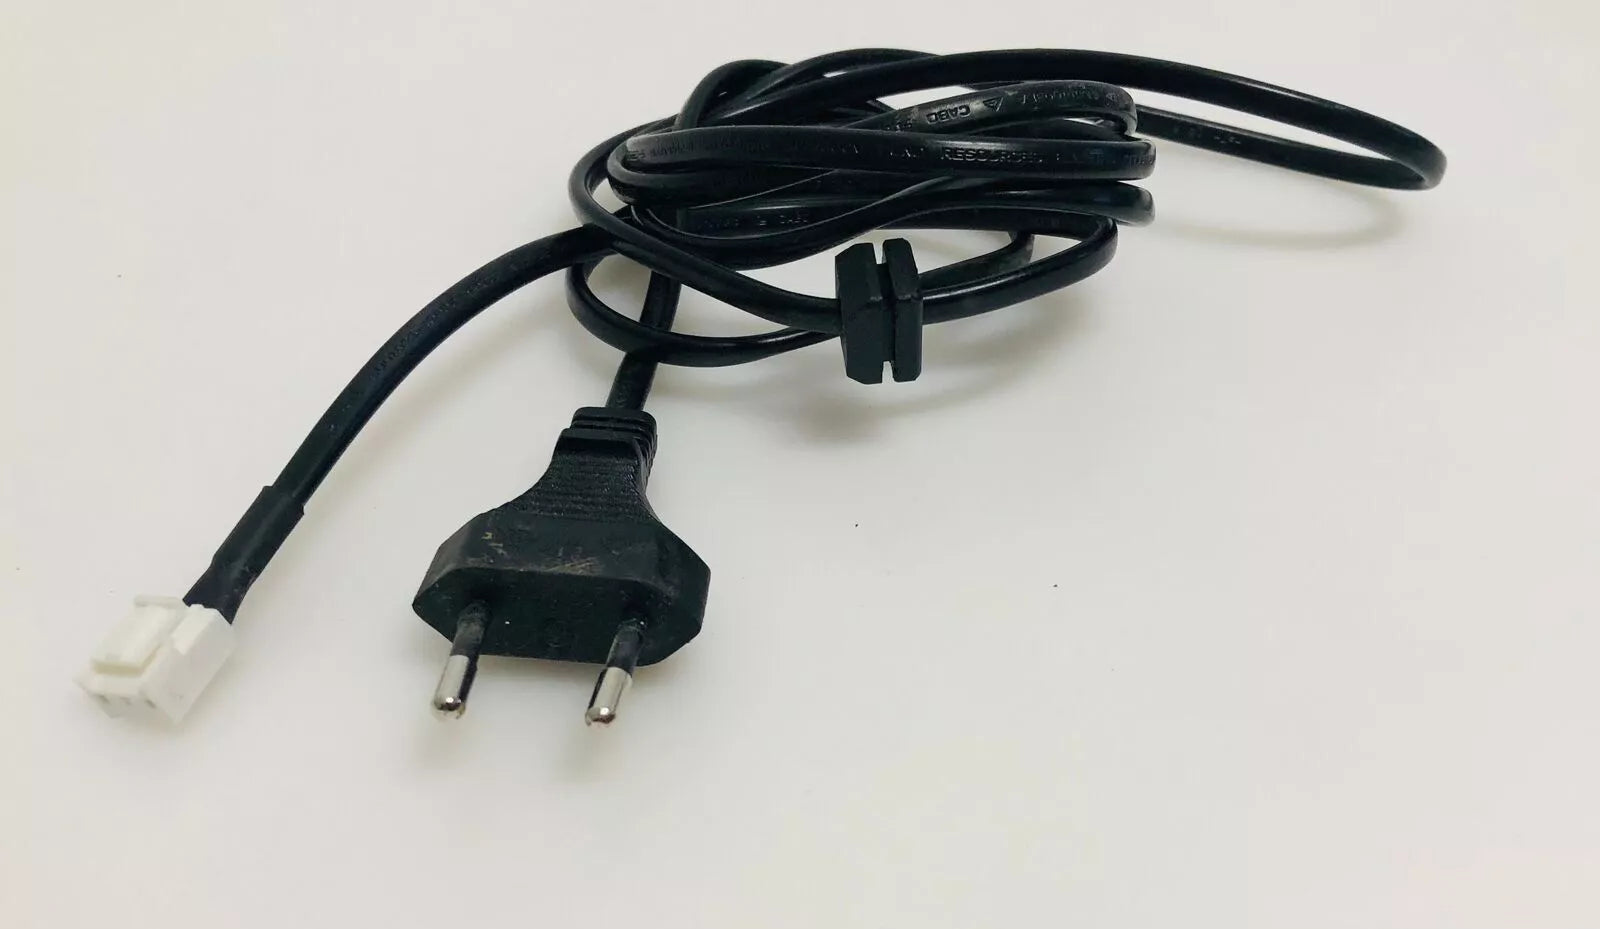 POWER CABLE - PHILIPS 43PFS5505/12